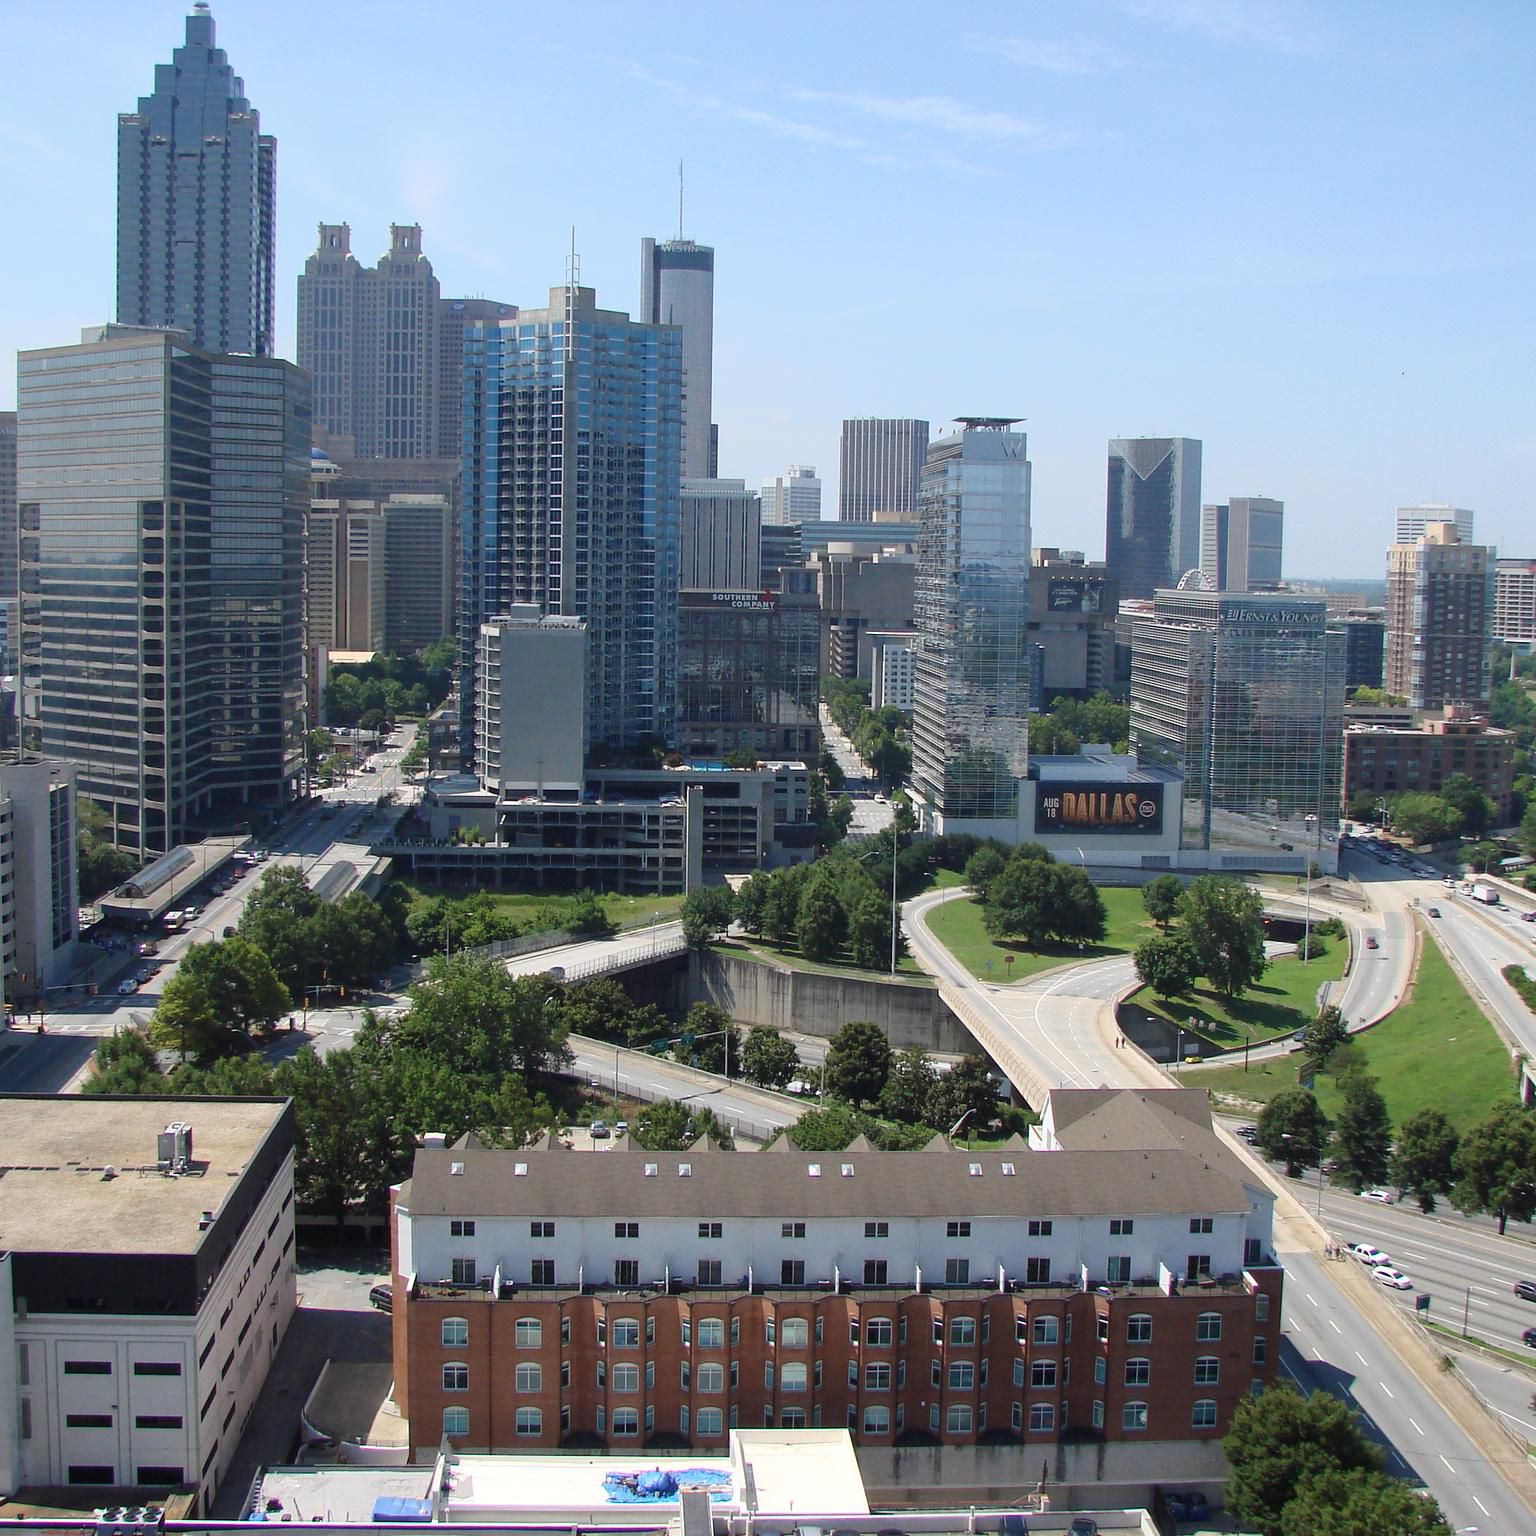 Enjoy the view from our hotel in Downtown Atlanta